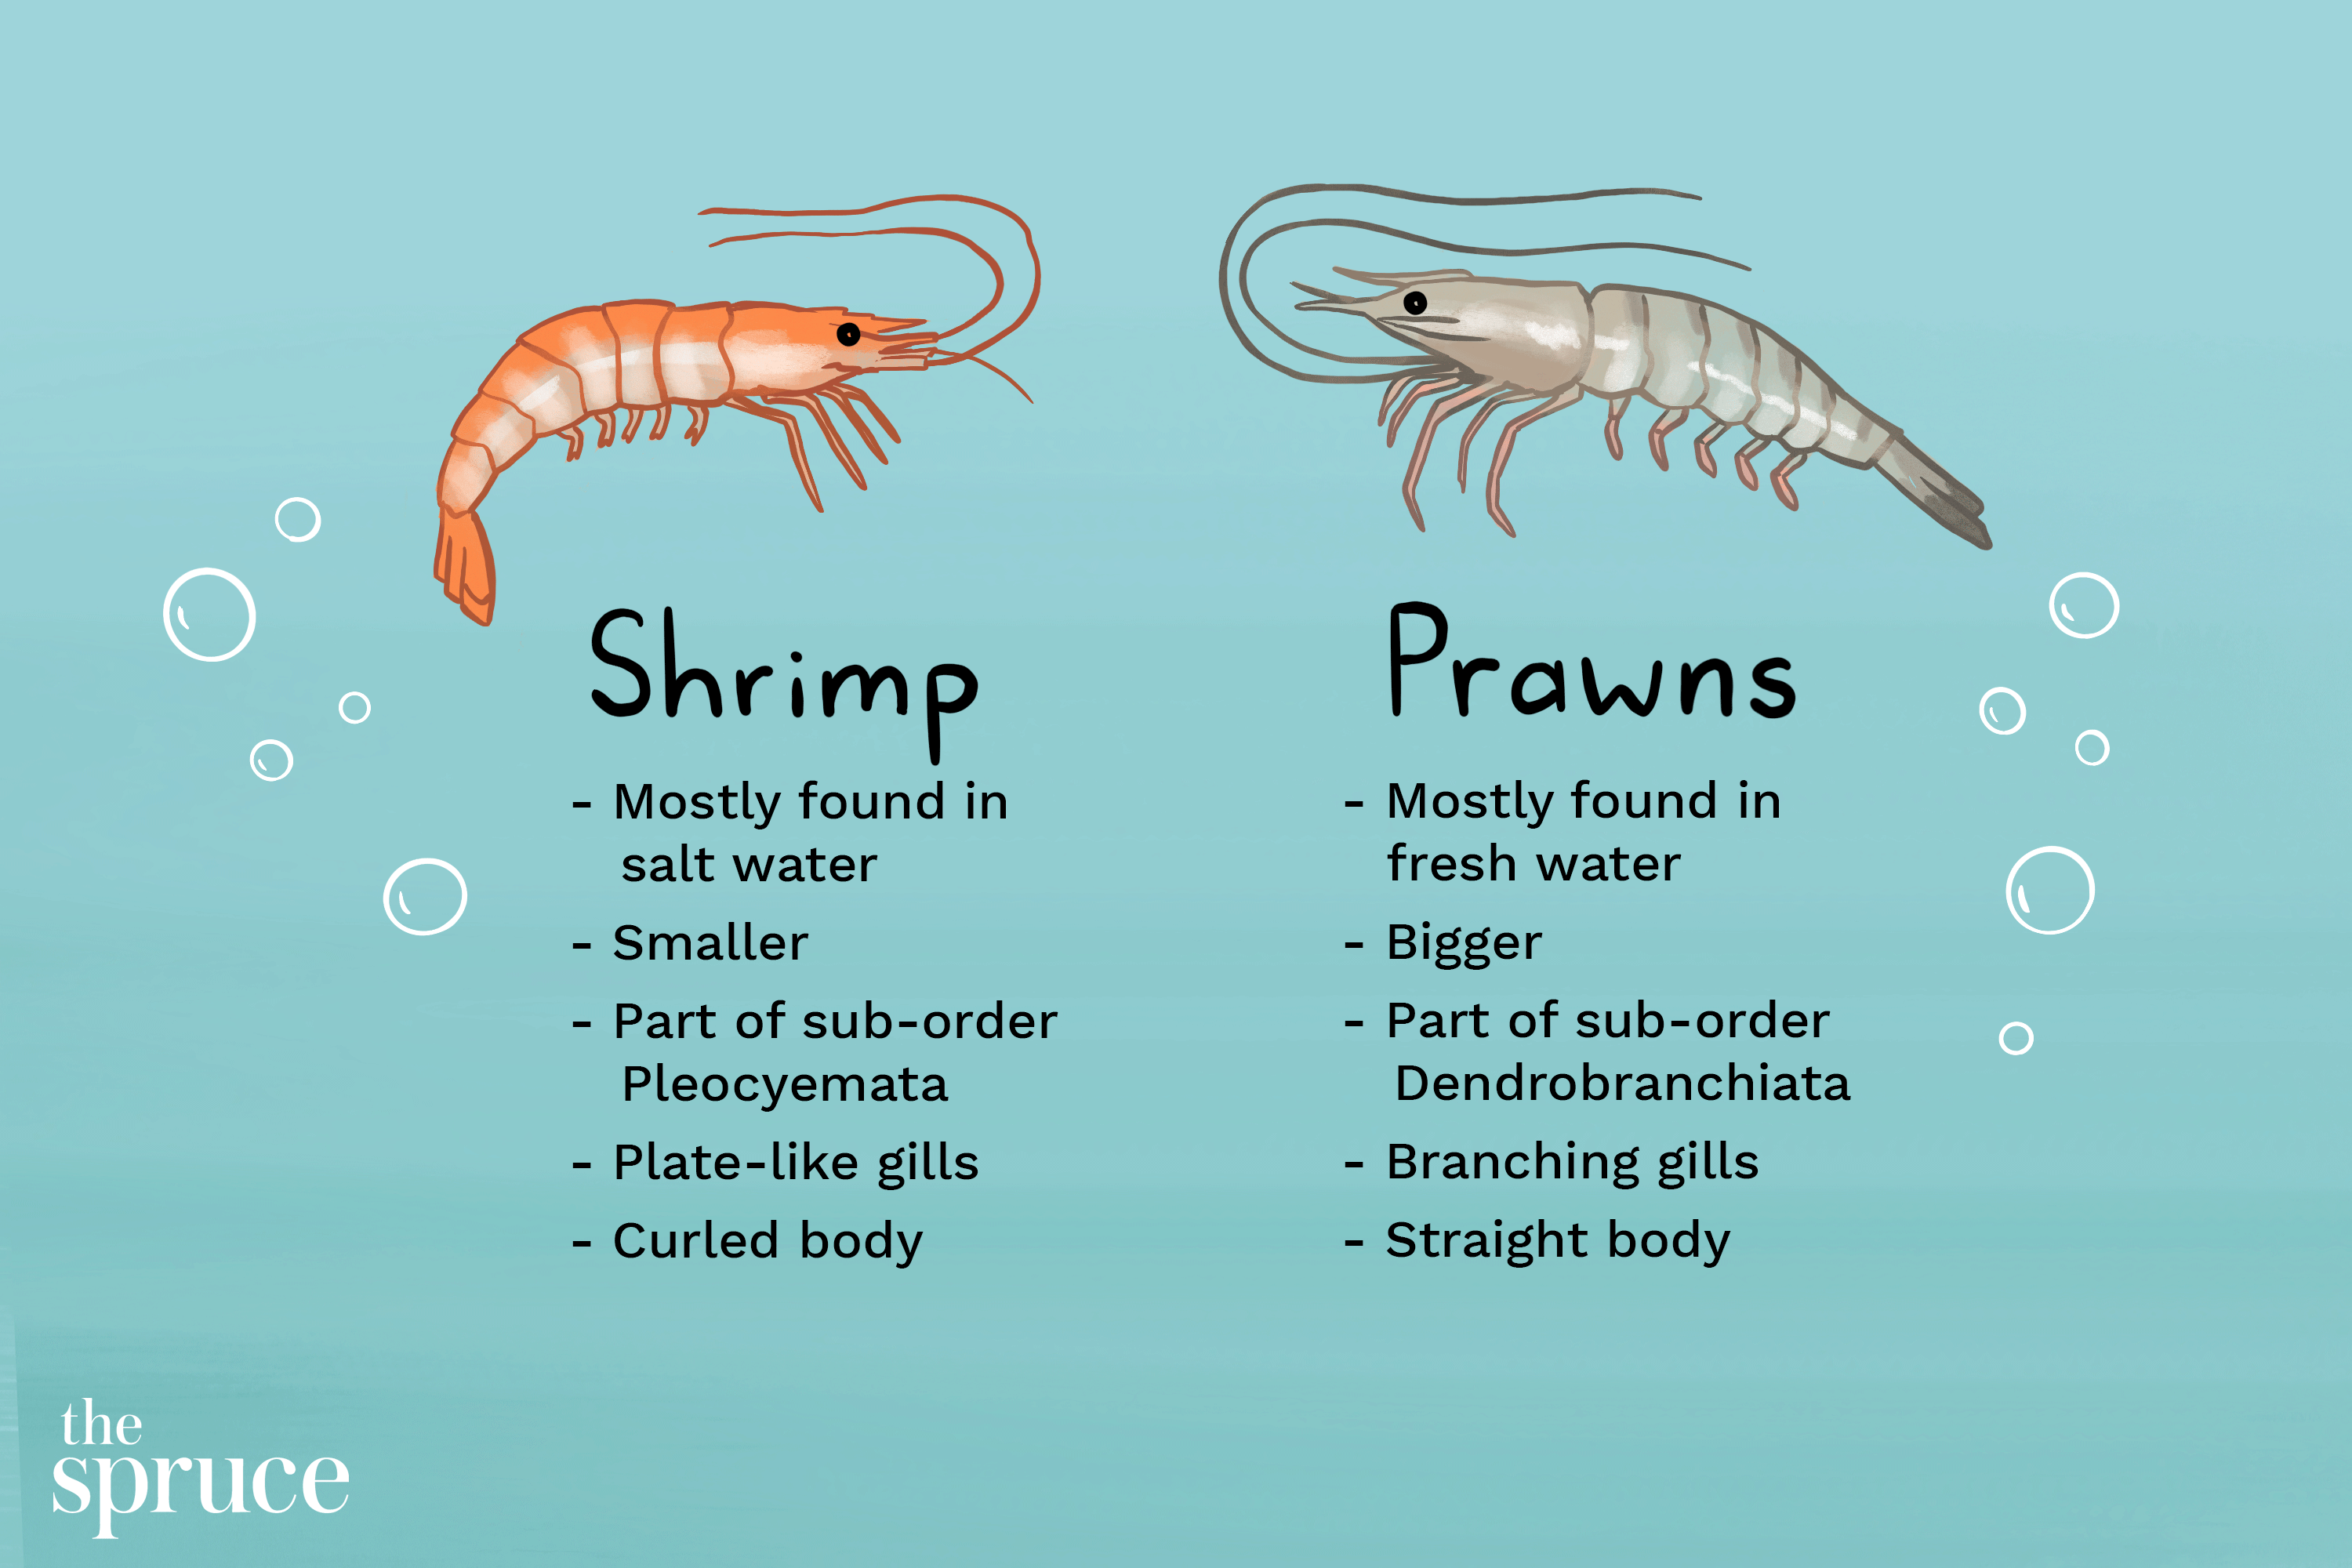 What is the difference between shrimp and prawns in biology?